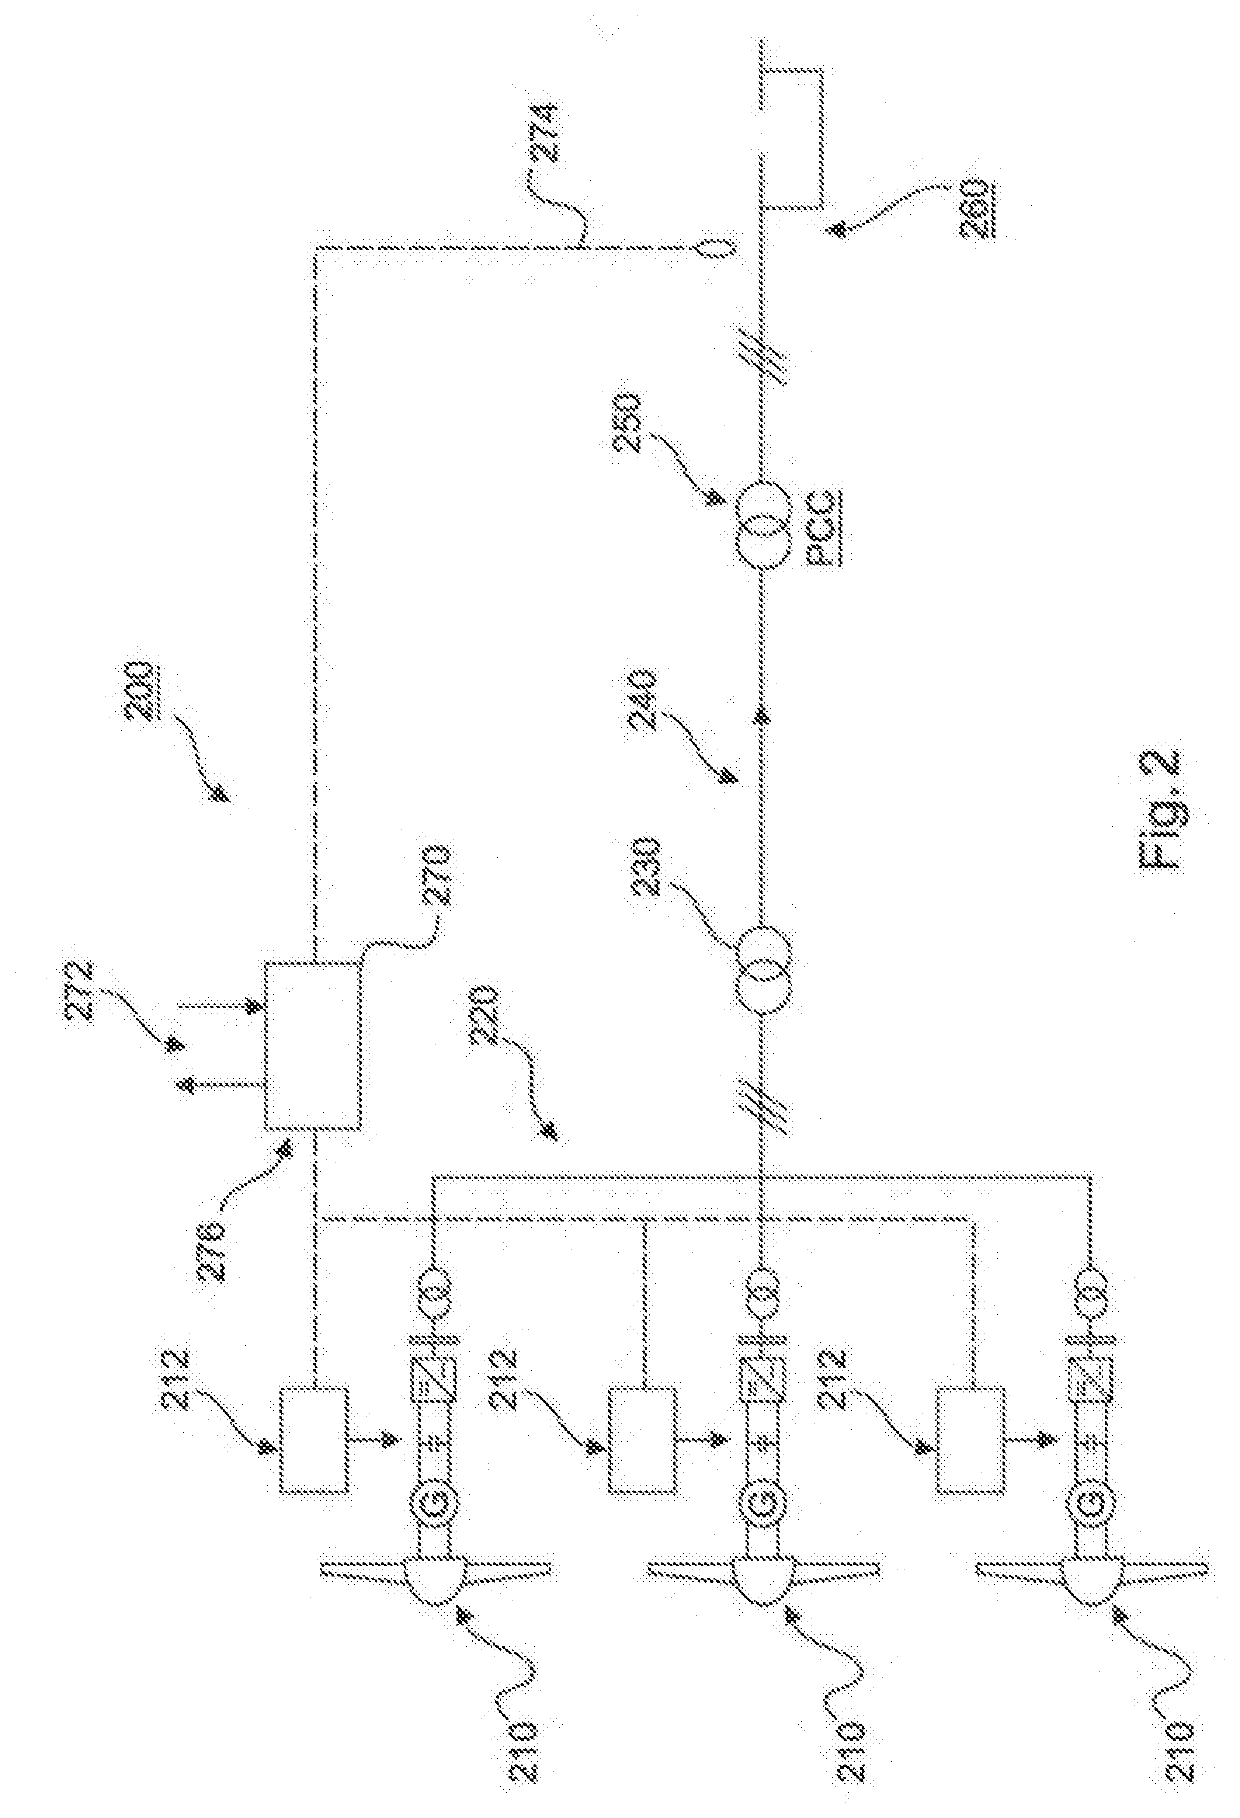 Method for controlling an electrical distribution network